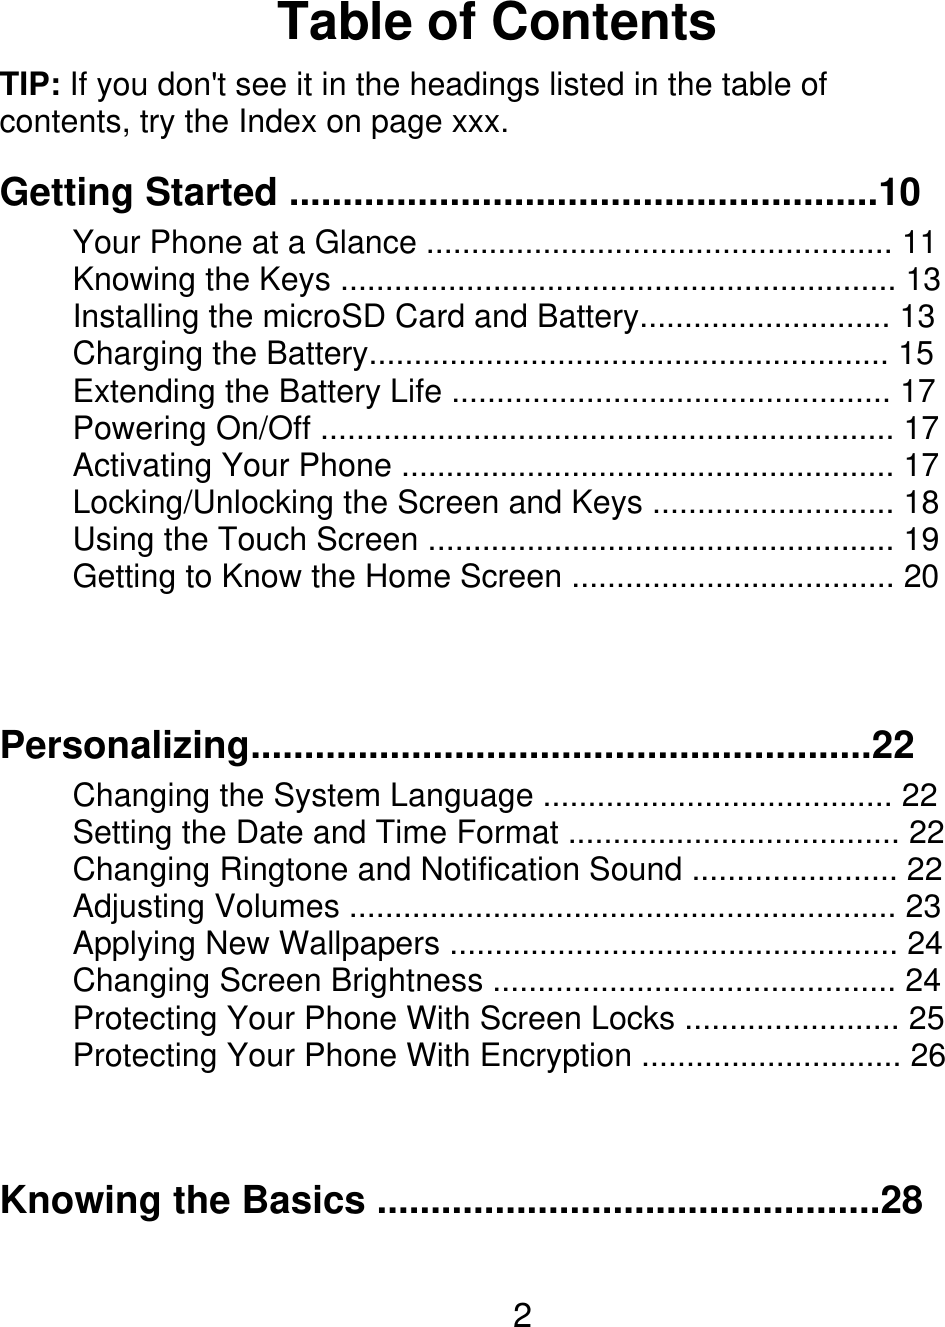 Table of Contents TIP: If you don&apos;t see it in the headings listed in the table of contents, try the Index on page xxx. Getting Started .......................................................10 Your Phone at a Glance .................................................... 11 Knowing the Keys .............................................................. 13 Installing the microSD Card and Battery............................ 13 Charging the Battery.......................................................... 15 Extending the Battery Life ................................................. 17 Powering On/Off ................................................................ 17 Activating Your Phone ....................................................... 17 Locking/Unlocking the Screen and Keys ........................... 18 Using the Touch Screen .................................................... 19 Getting to Know the Home Screen .................................... 20 Personalizing..........................................................22 Changing the System Language ....................................... 22 Setting the Date and Time Format ..................................... 22 Changing Ringtone and Notification Sound ....................... 22 Adjusting Volumes ............................................................. 23 Applying New Wallpapers .................................................. 24 Changing Screen Brightness ............................................. 24 Protecting Your Phone With Screen Locks ........................ 25 Protecting Your Phone With Encryption ............................. 26 Knowing the Basics ...............................................28 2 